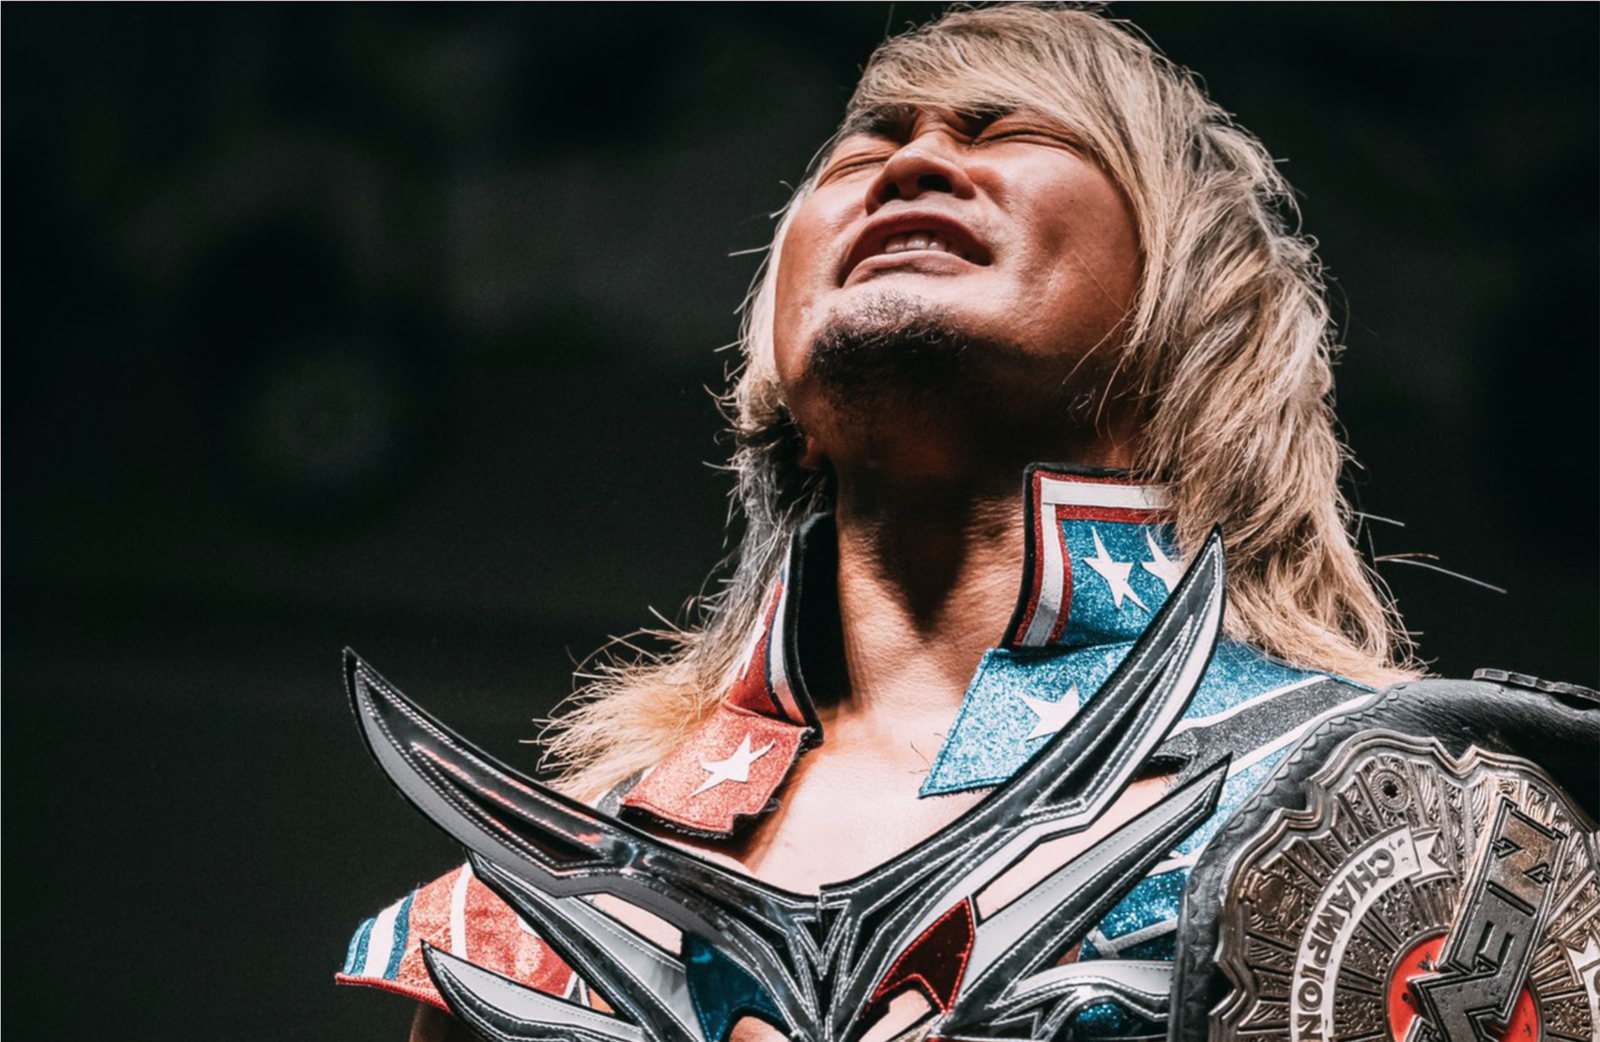 Photograph of Hiroshi Tanahashi holding the NEVER Openweight Championship in New Japan Pro Wrestling